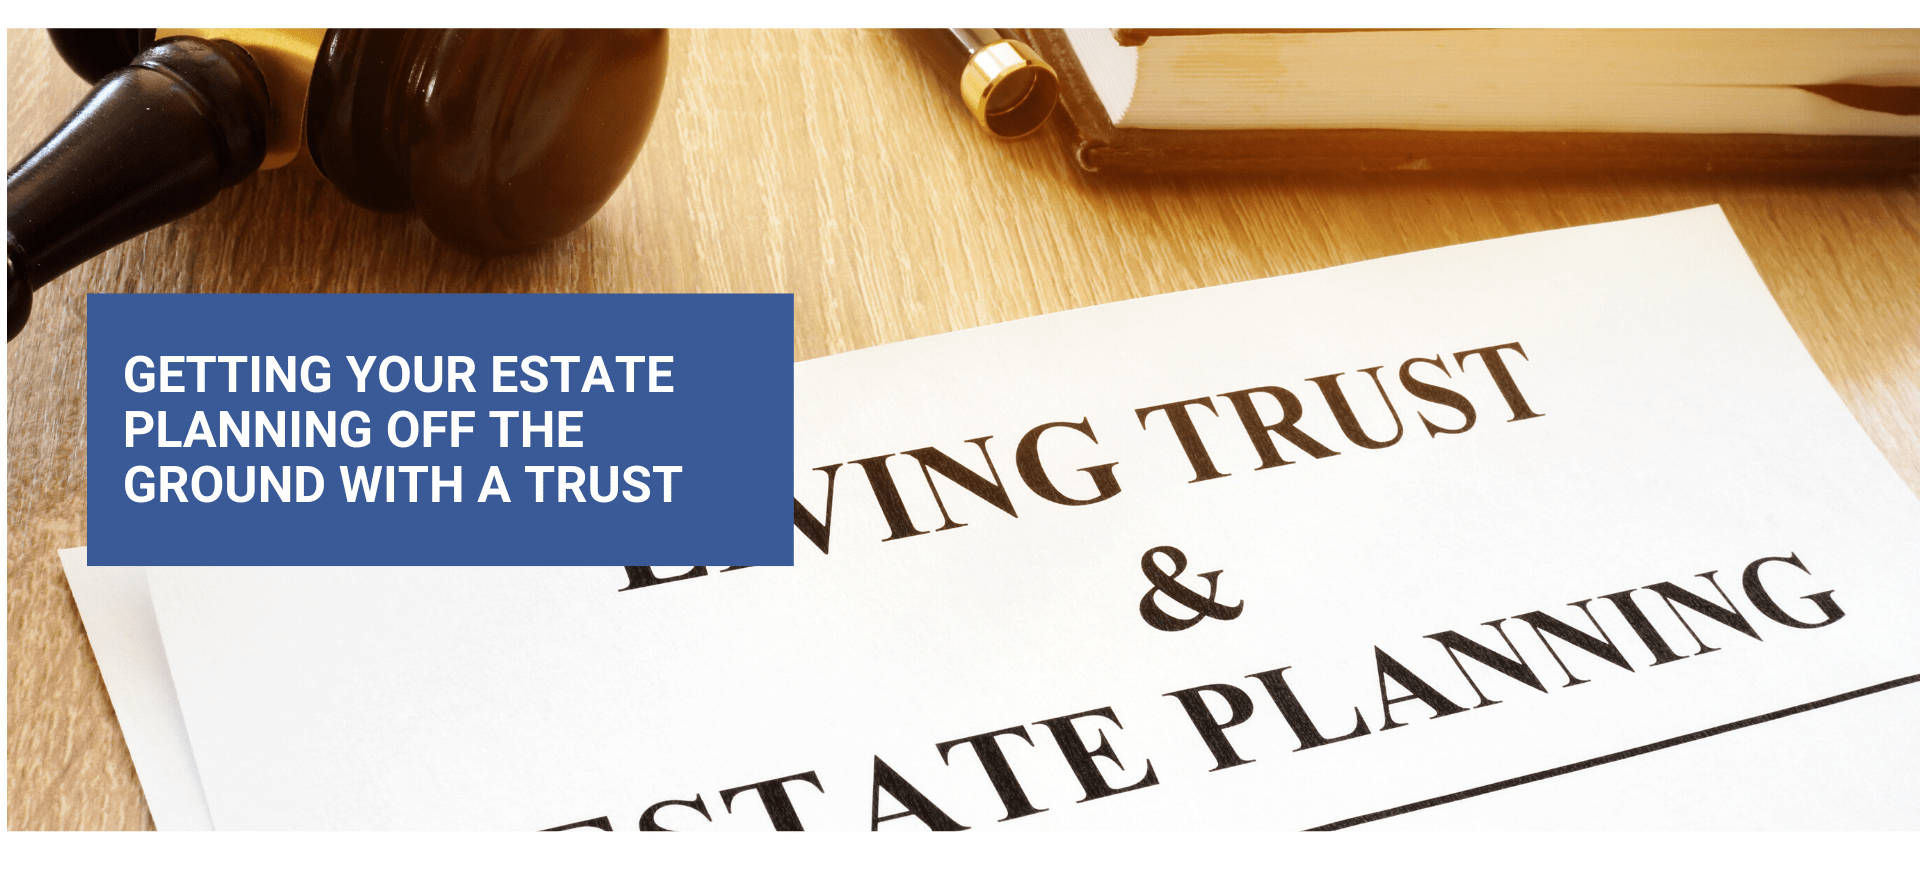 Getting Your Estate Planning off the Ground with a Trust